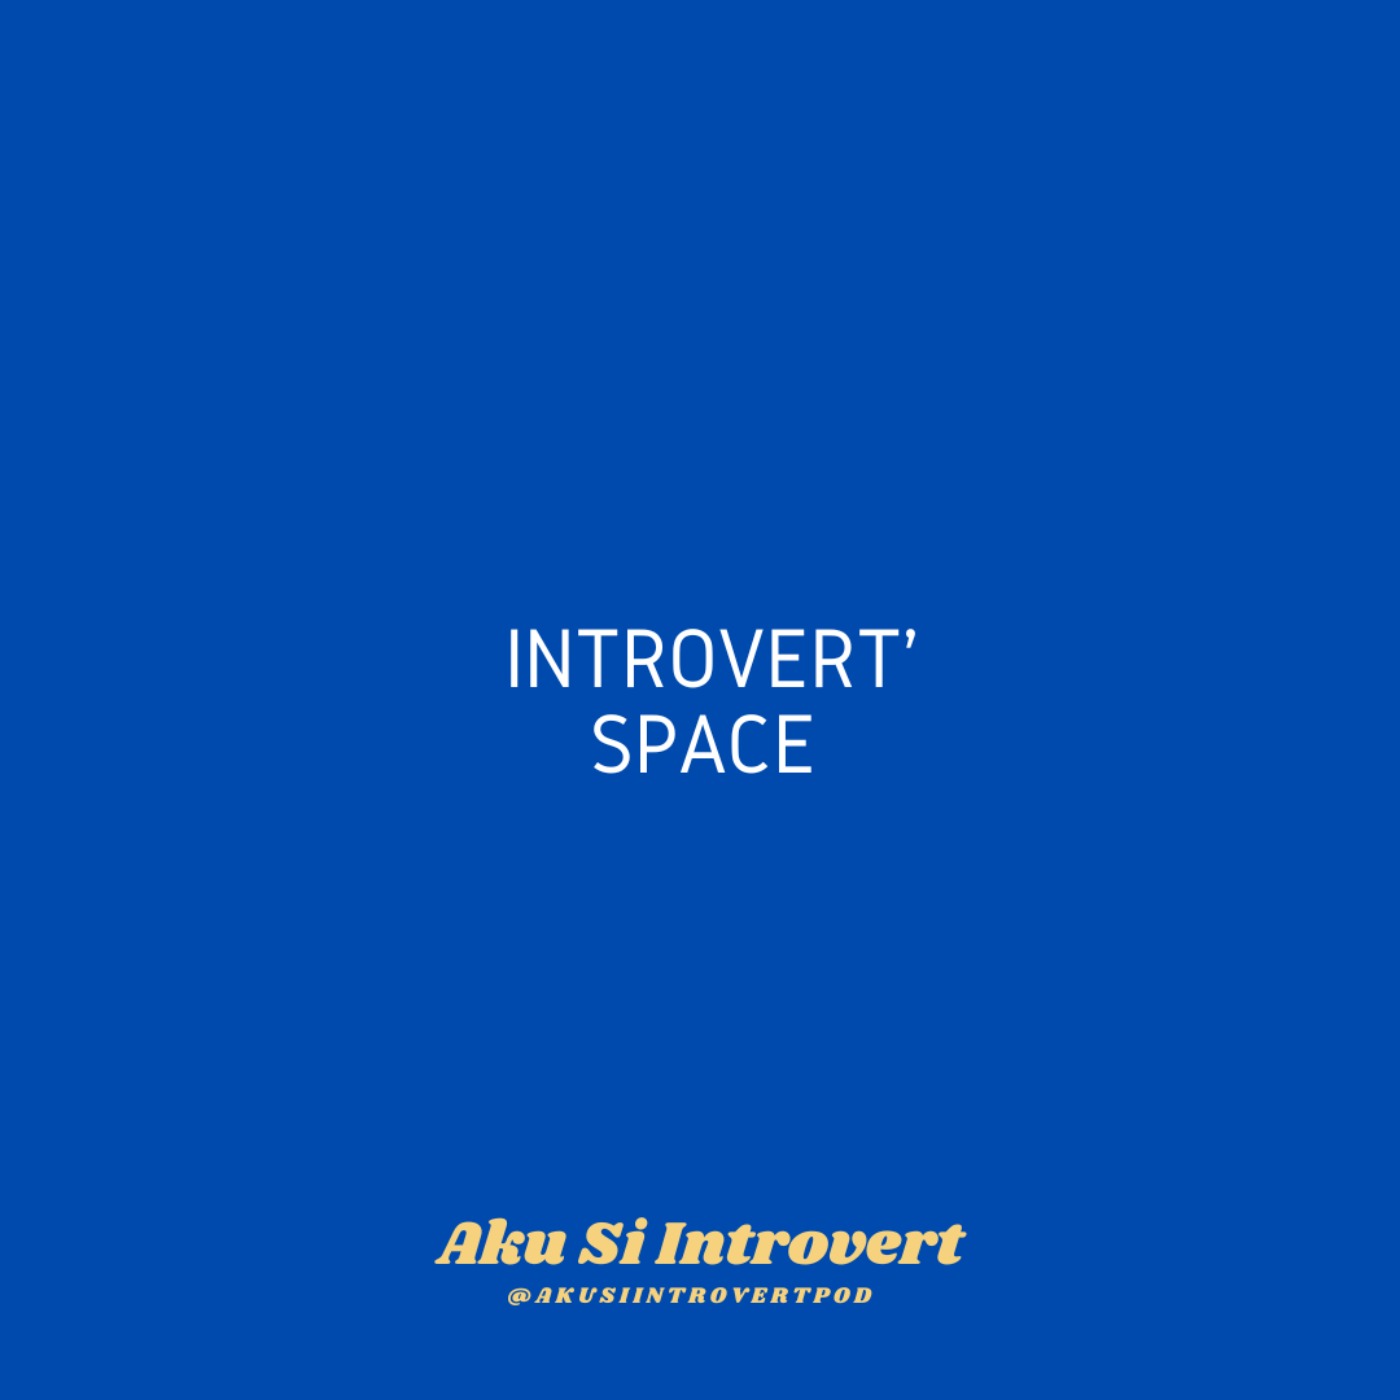 INTROVERT SERIES: Introvert's Space